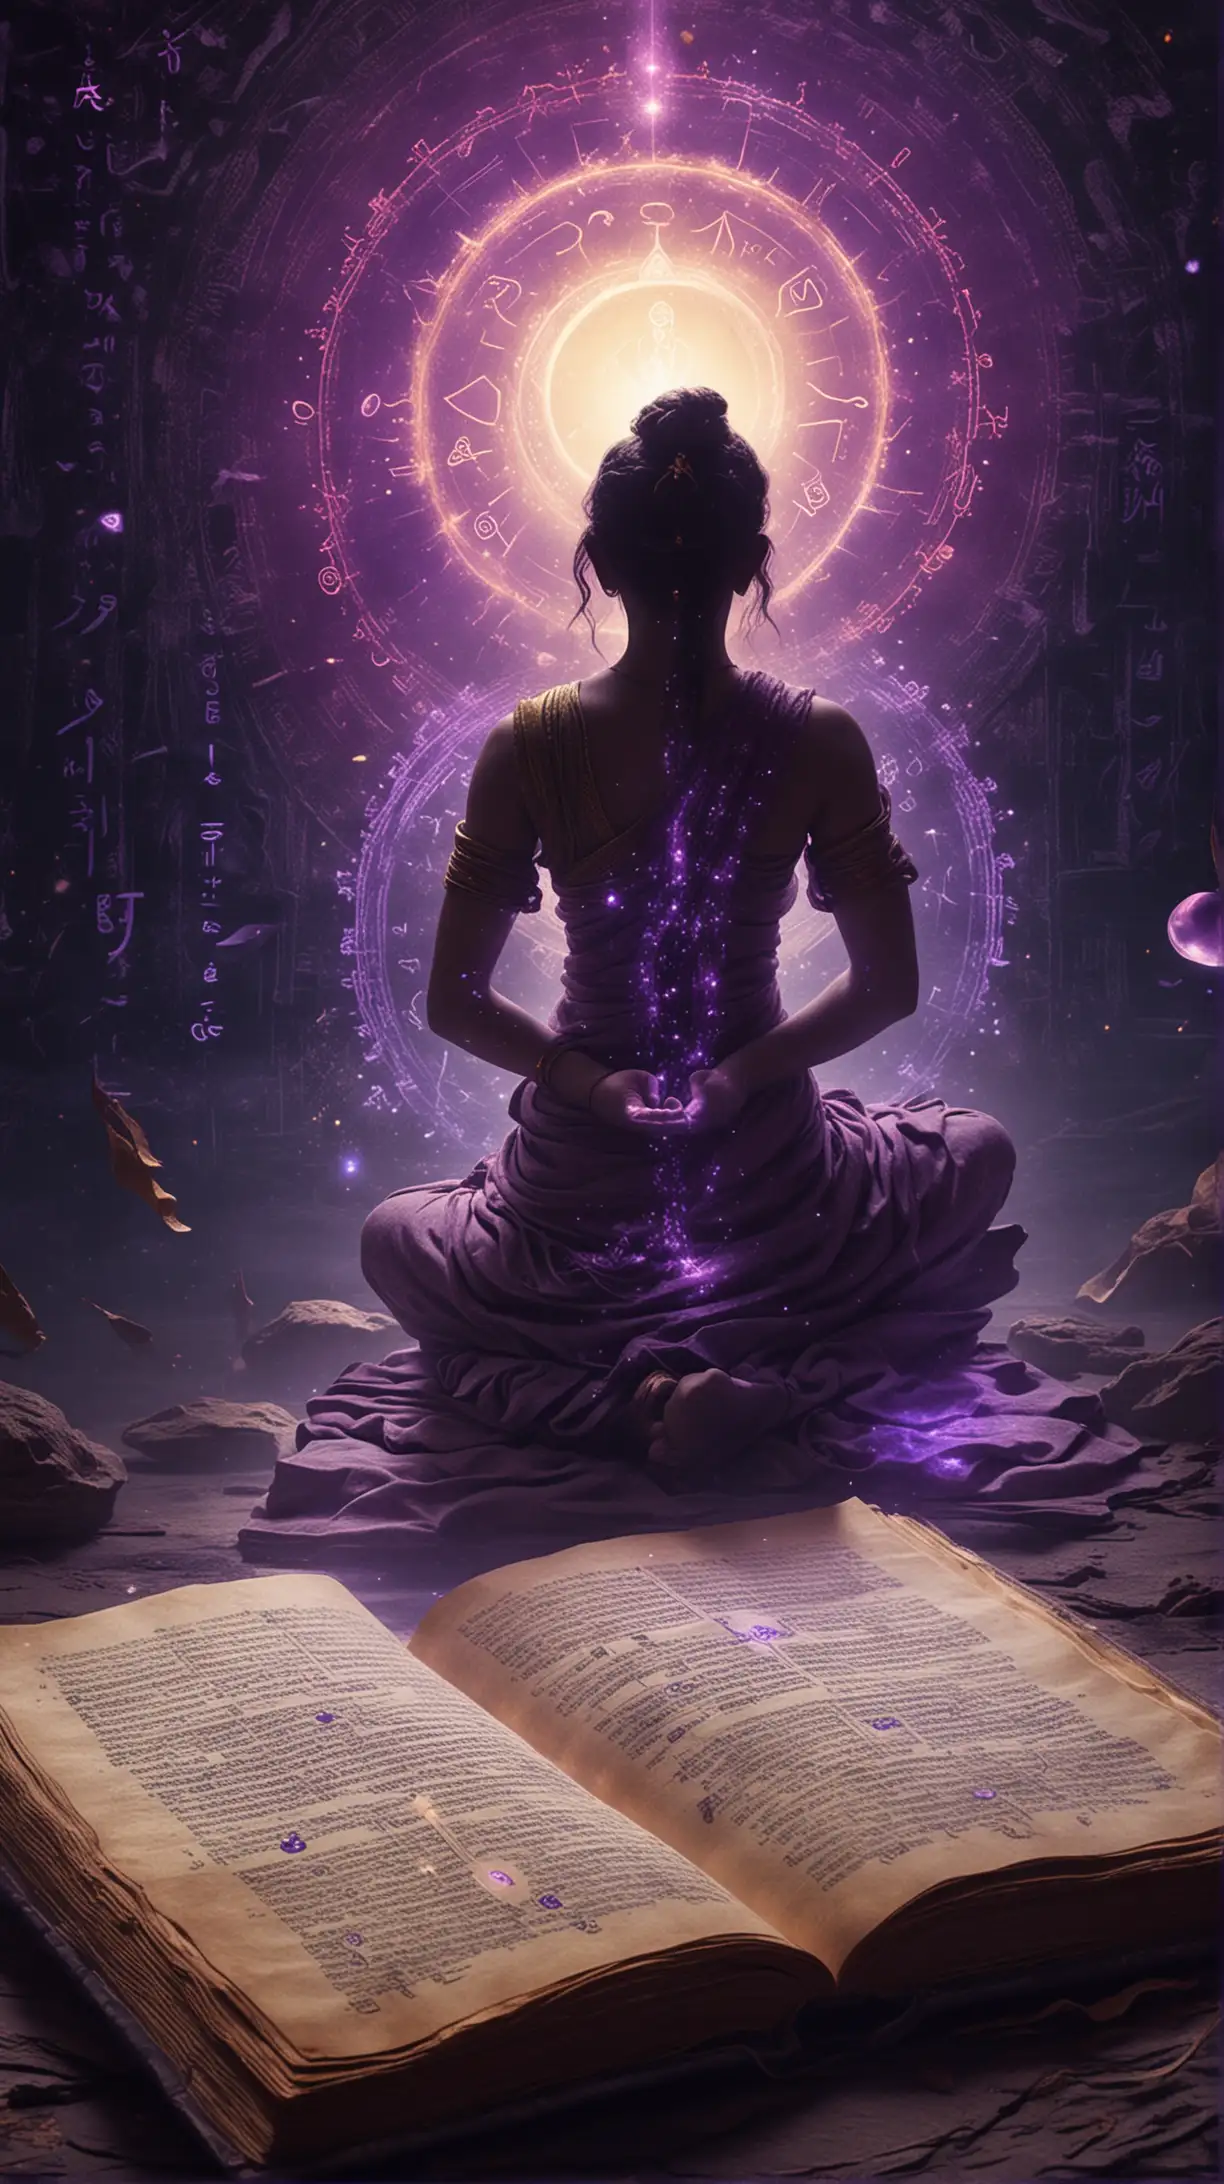 Mystical Book with Meditating Silhouette Cosmic Symbols and Ancient Wisdom